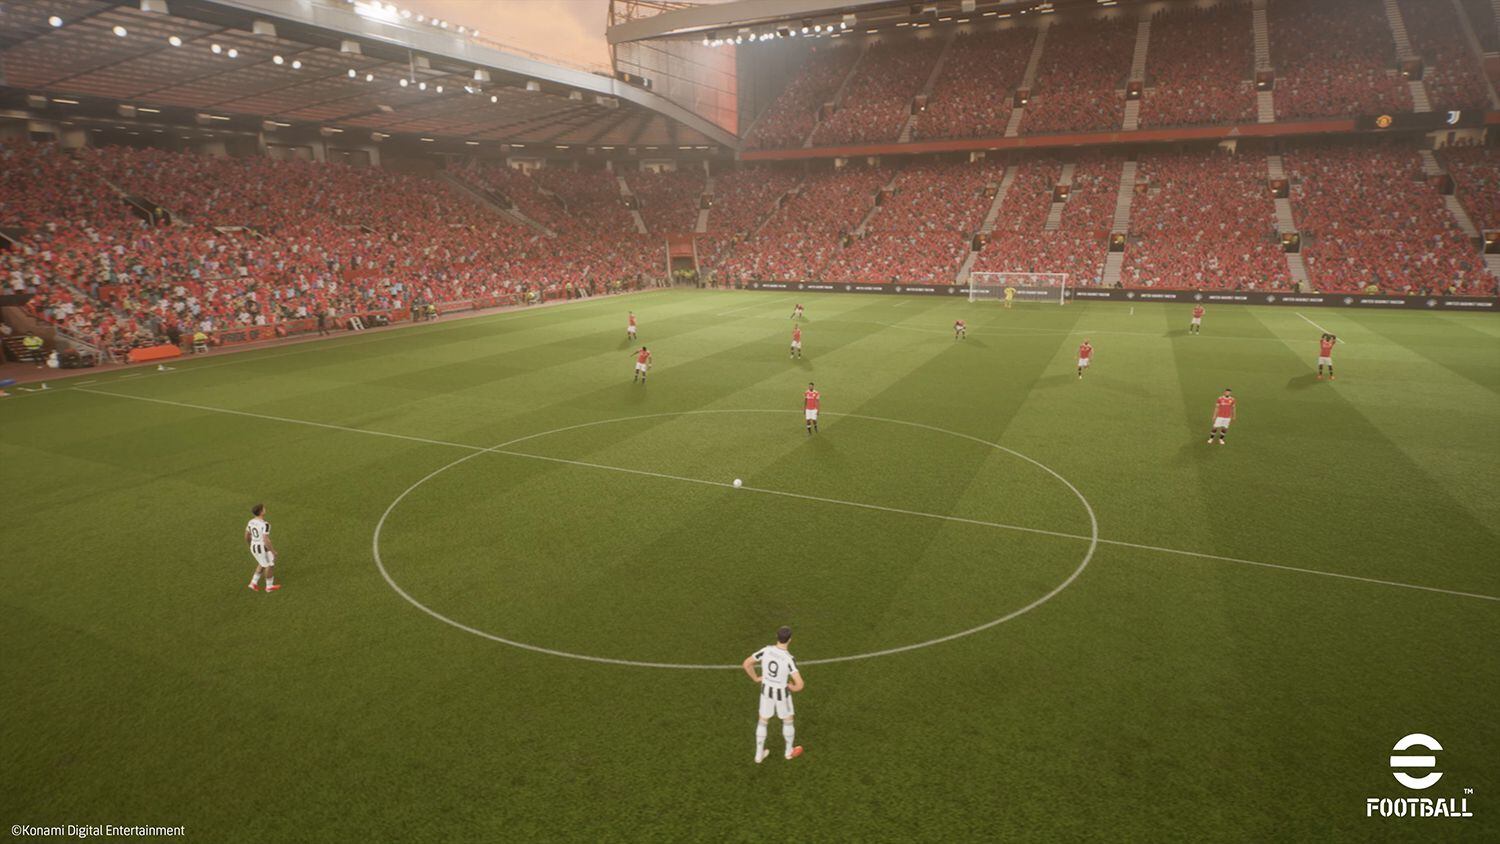 eFootball will use the new version of the Unreal Engine graphics engine. (Image: Konami)